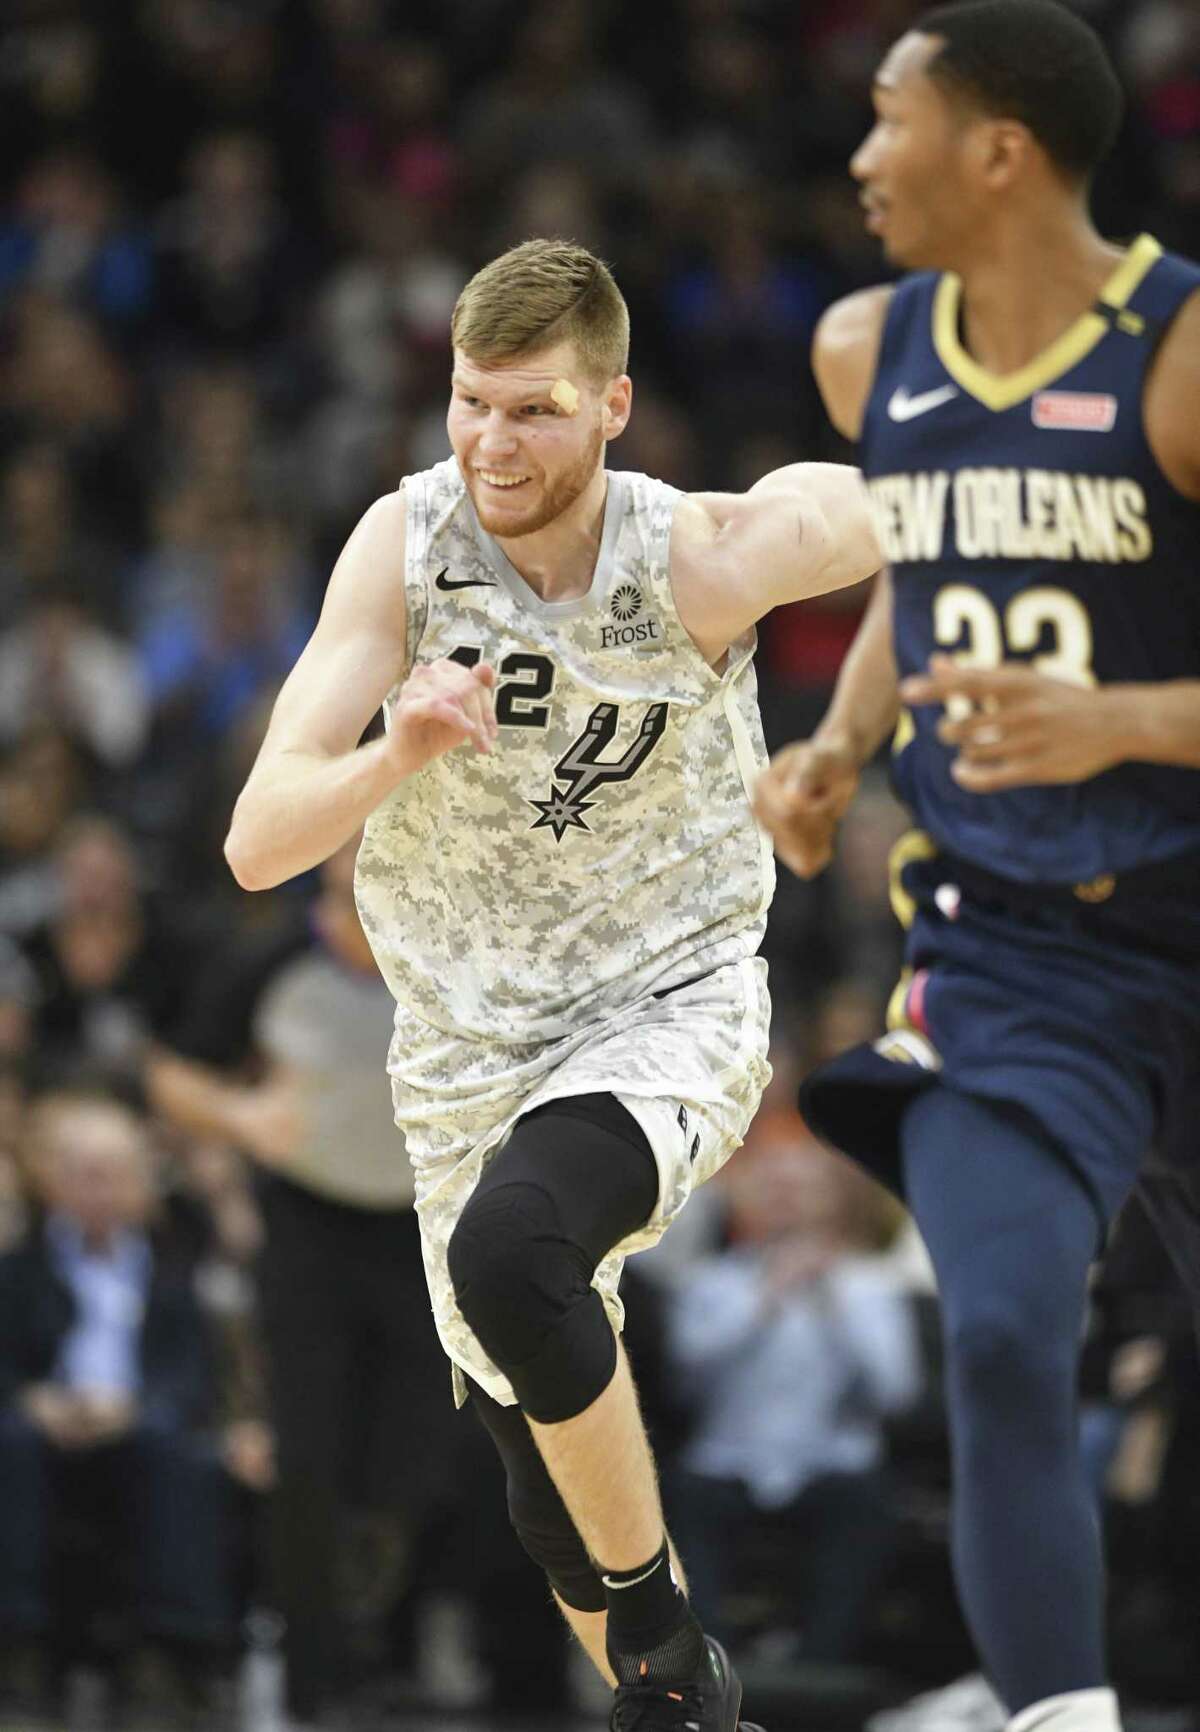 Davis Bertrans of the San Antonio Spurs runs to defend after scoring against the New Orleans Pelicans during NBA action in the AT&T Center on Saturday, Feb. 2, 2019.